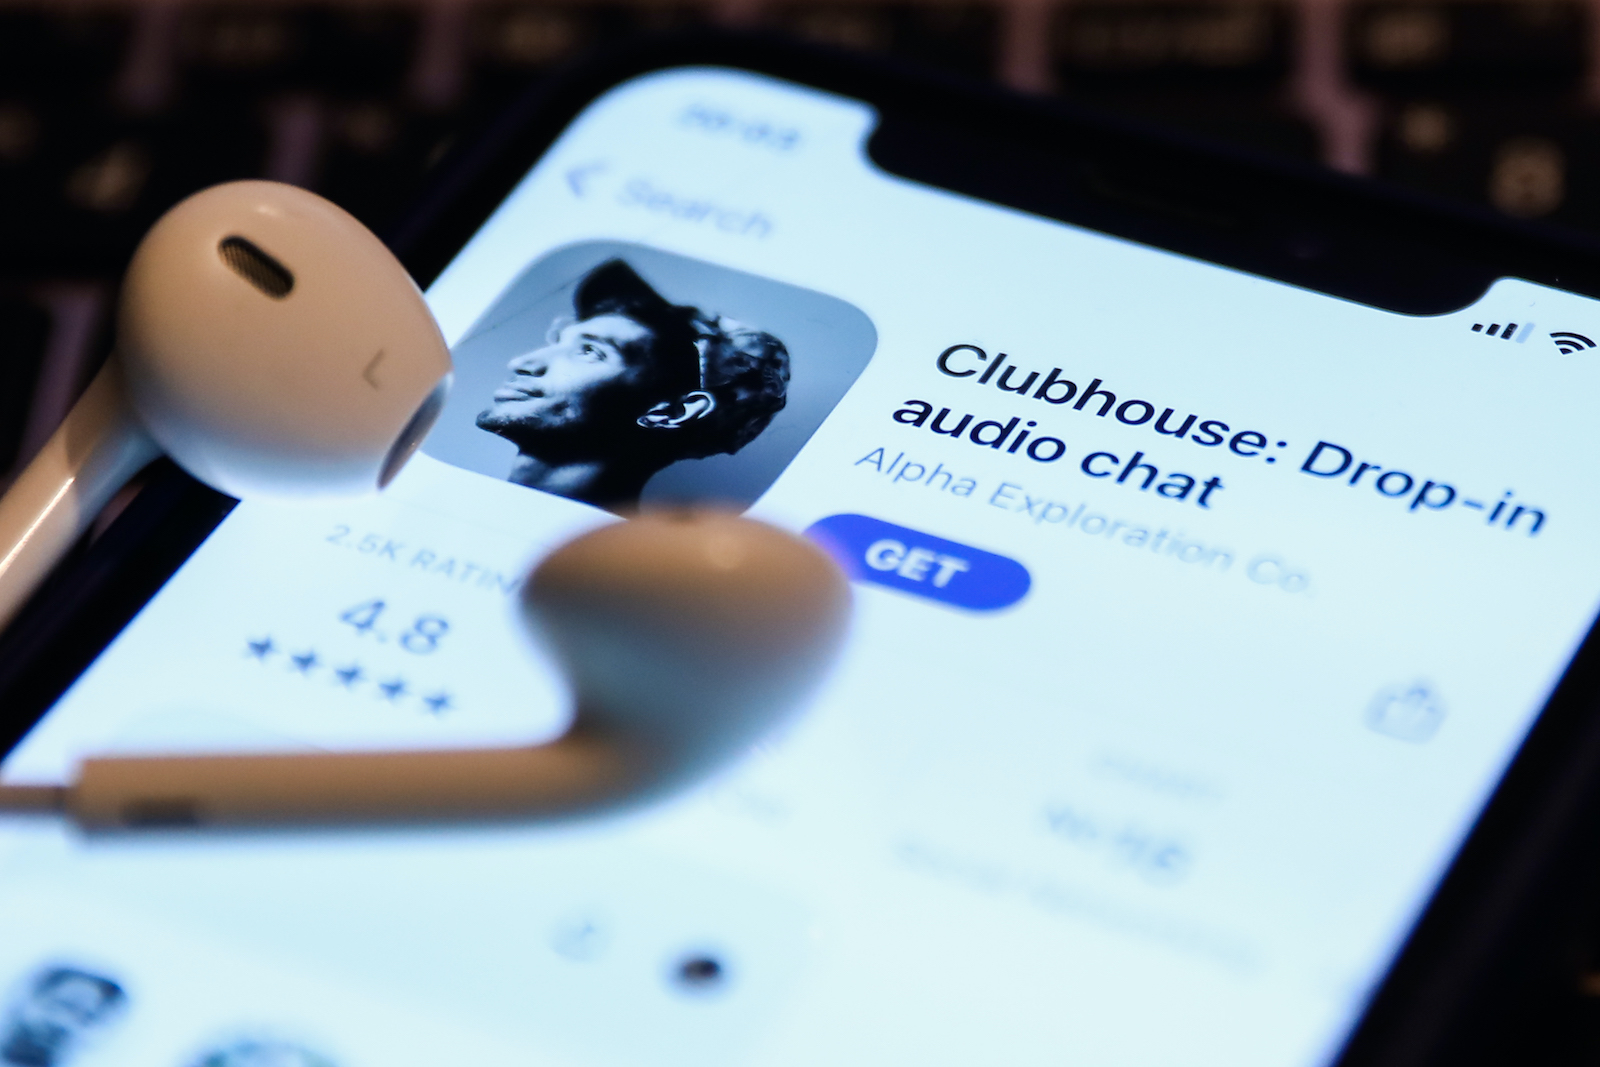 Clubhouse Drop-in audio chat app logo on the App Store is seen displayed on a phone screen in this illustration photo taken in Krakow, Poland on April 6, 2021.(Photo Illustration by Jakub Porzycki/NurPhoto via Getty Images)